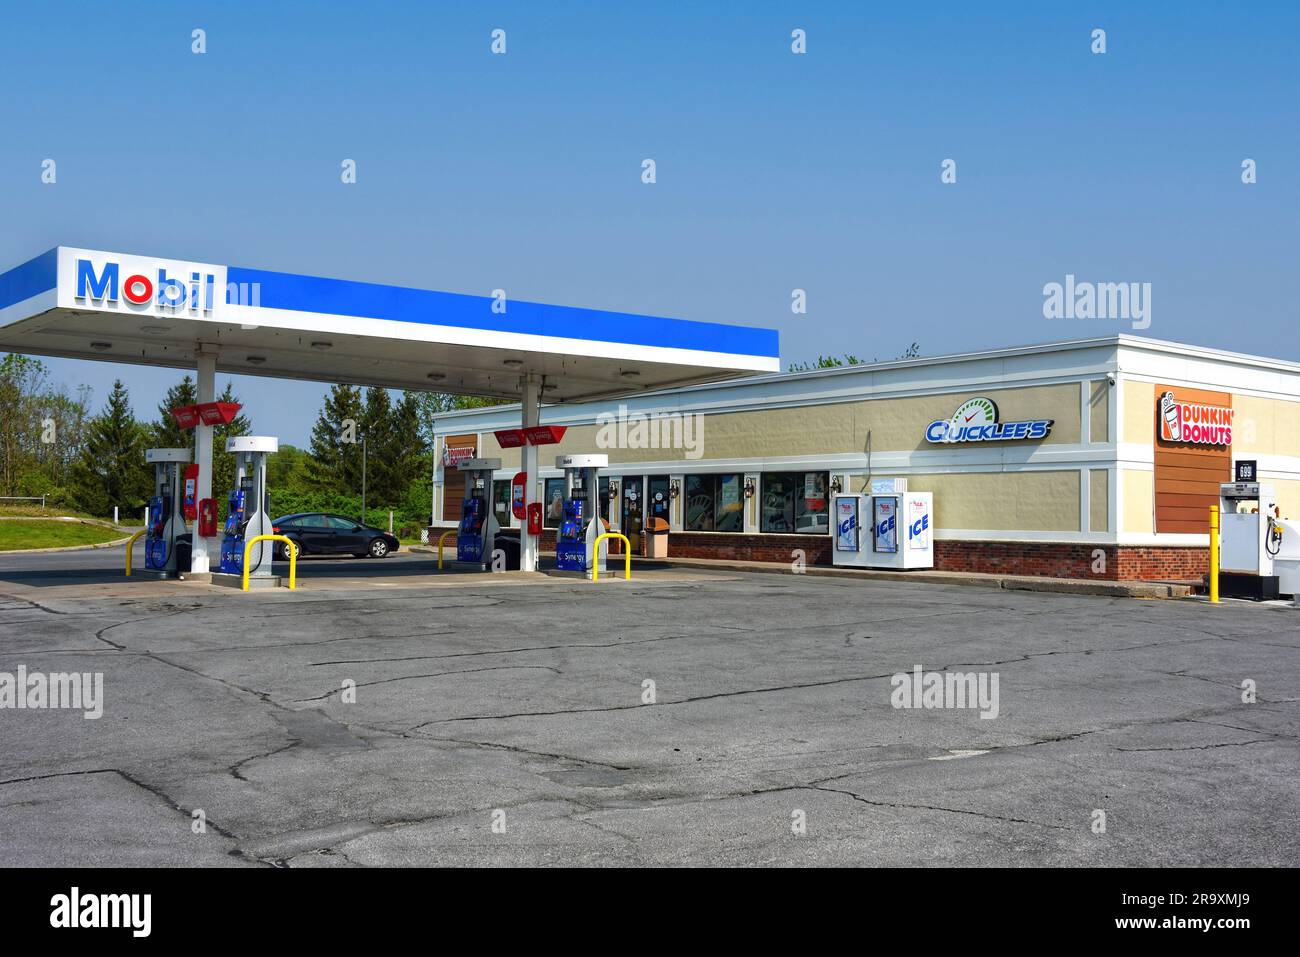 Watertown, NY, USA - May 22, 2023: Mobil Oil gas station with Quicklee's and Dunkin' Donuts. Quicklee’s is a convenience store chain in Upstate New Yo Stock Photo